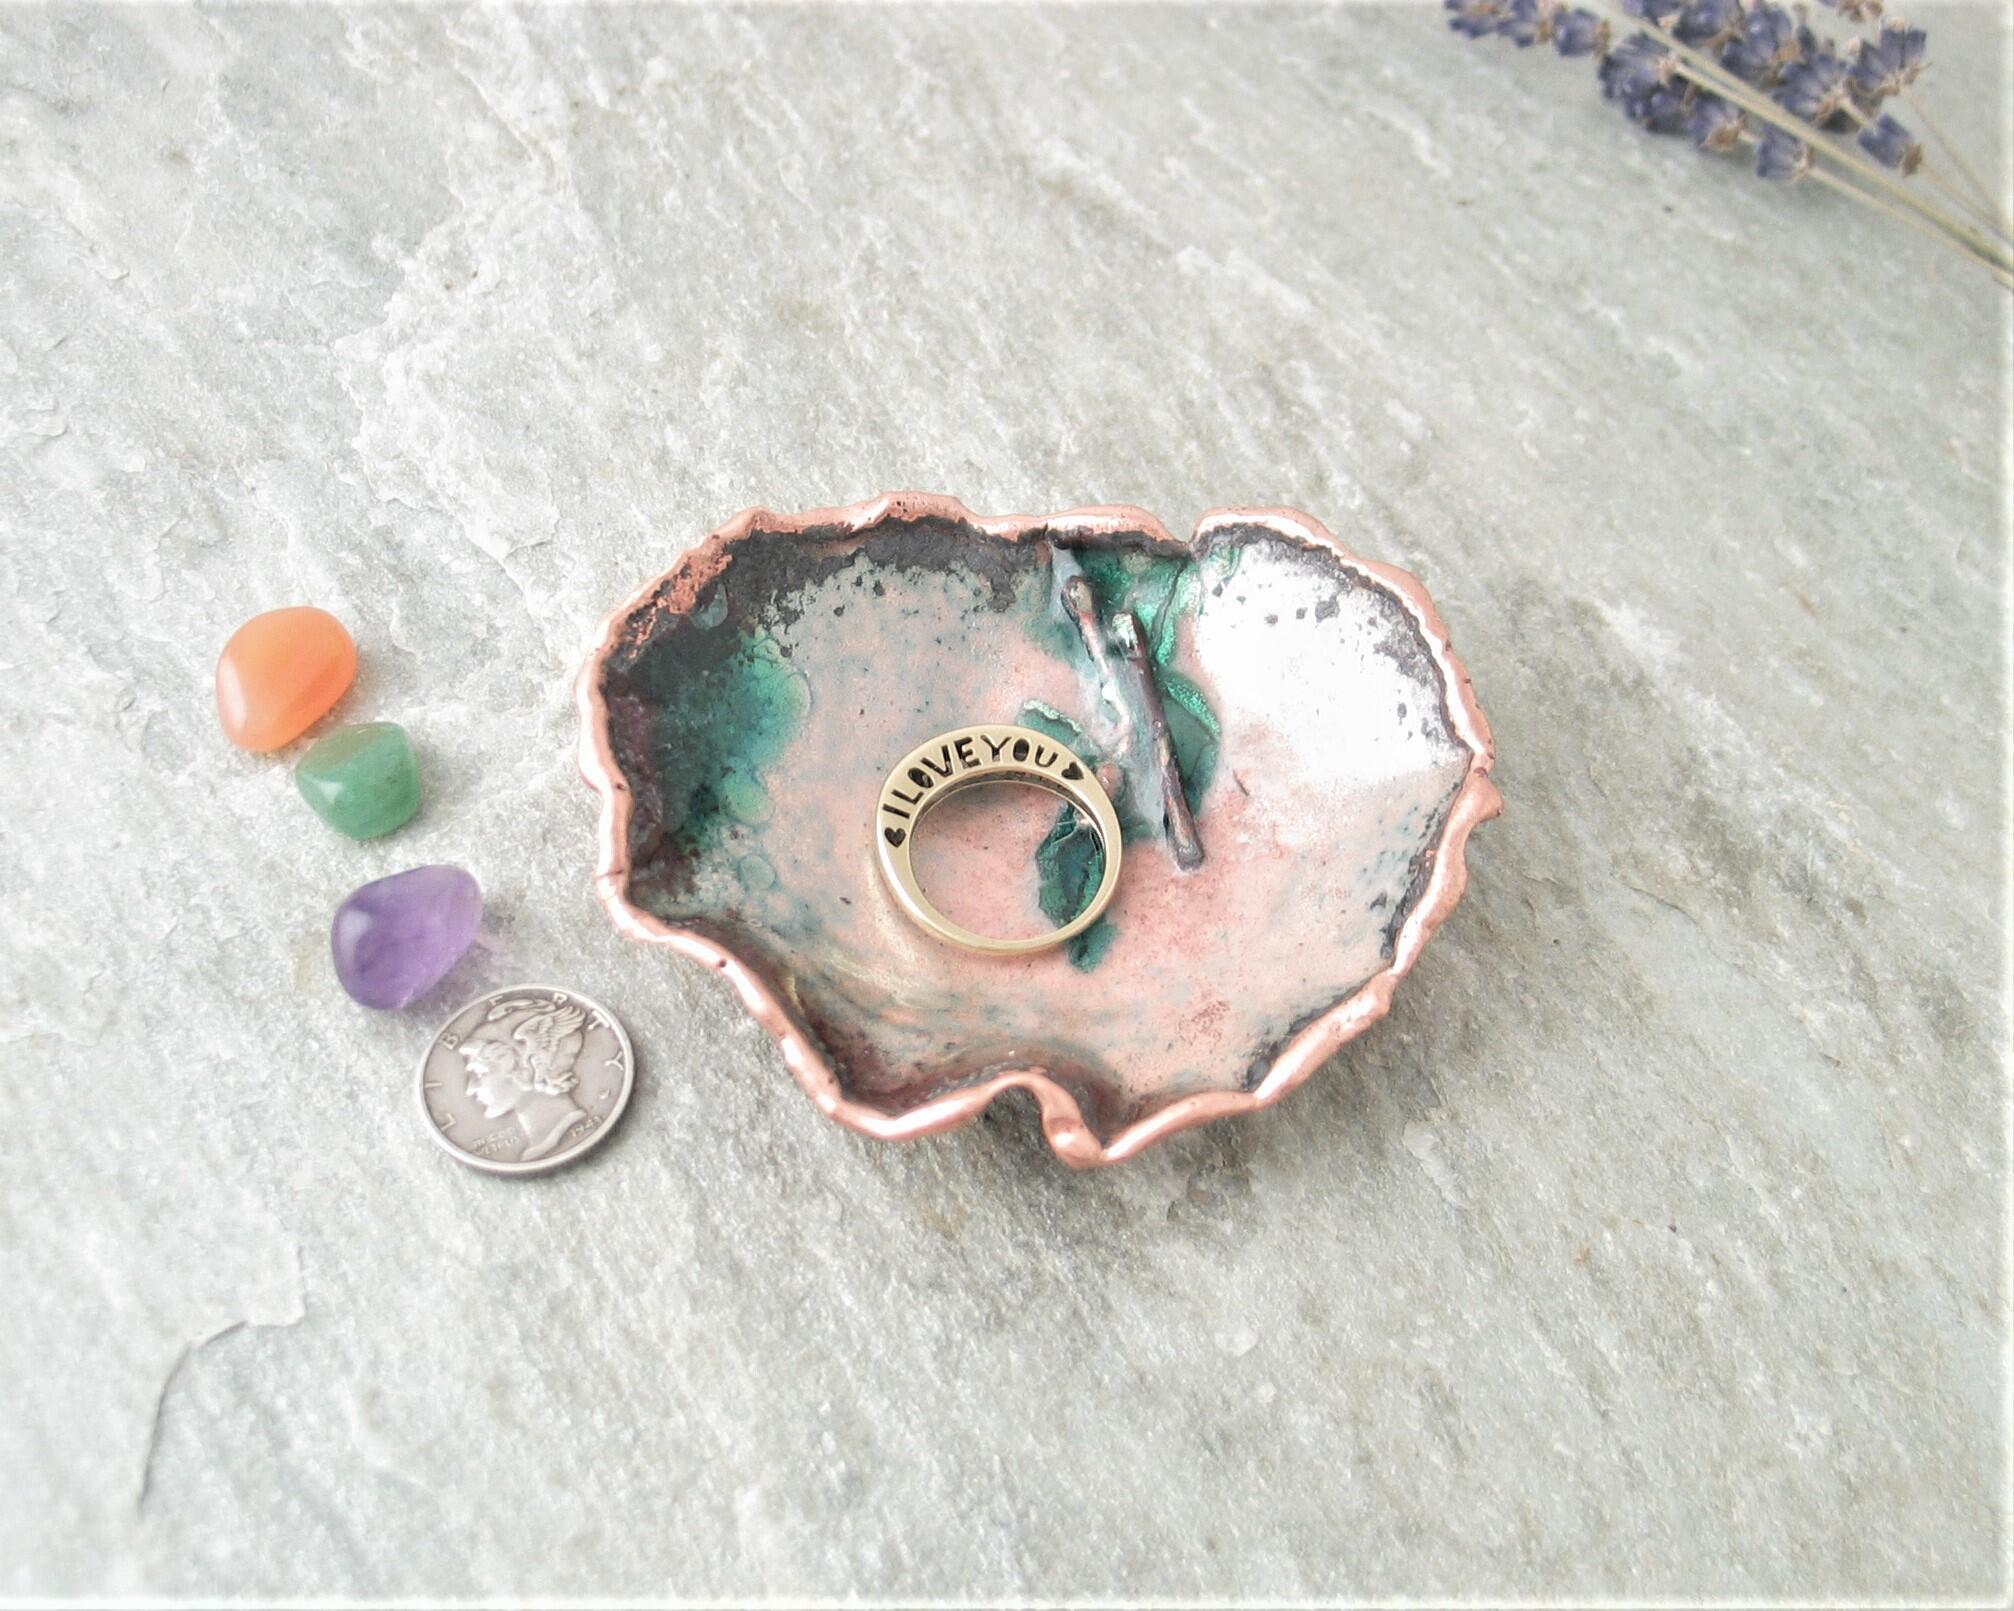 free form copper enamel trinket dish shown with coins and I Love You ring as size comparison